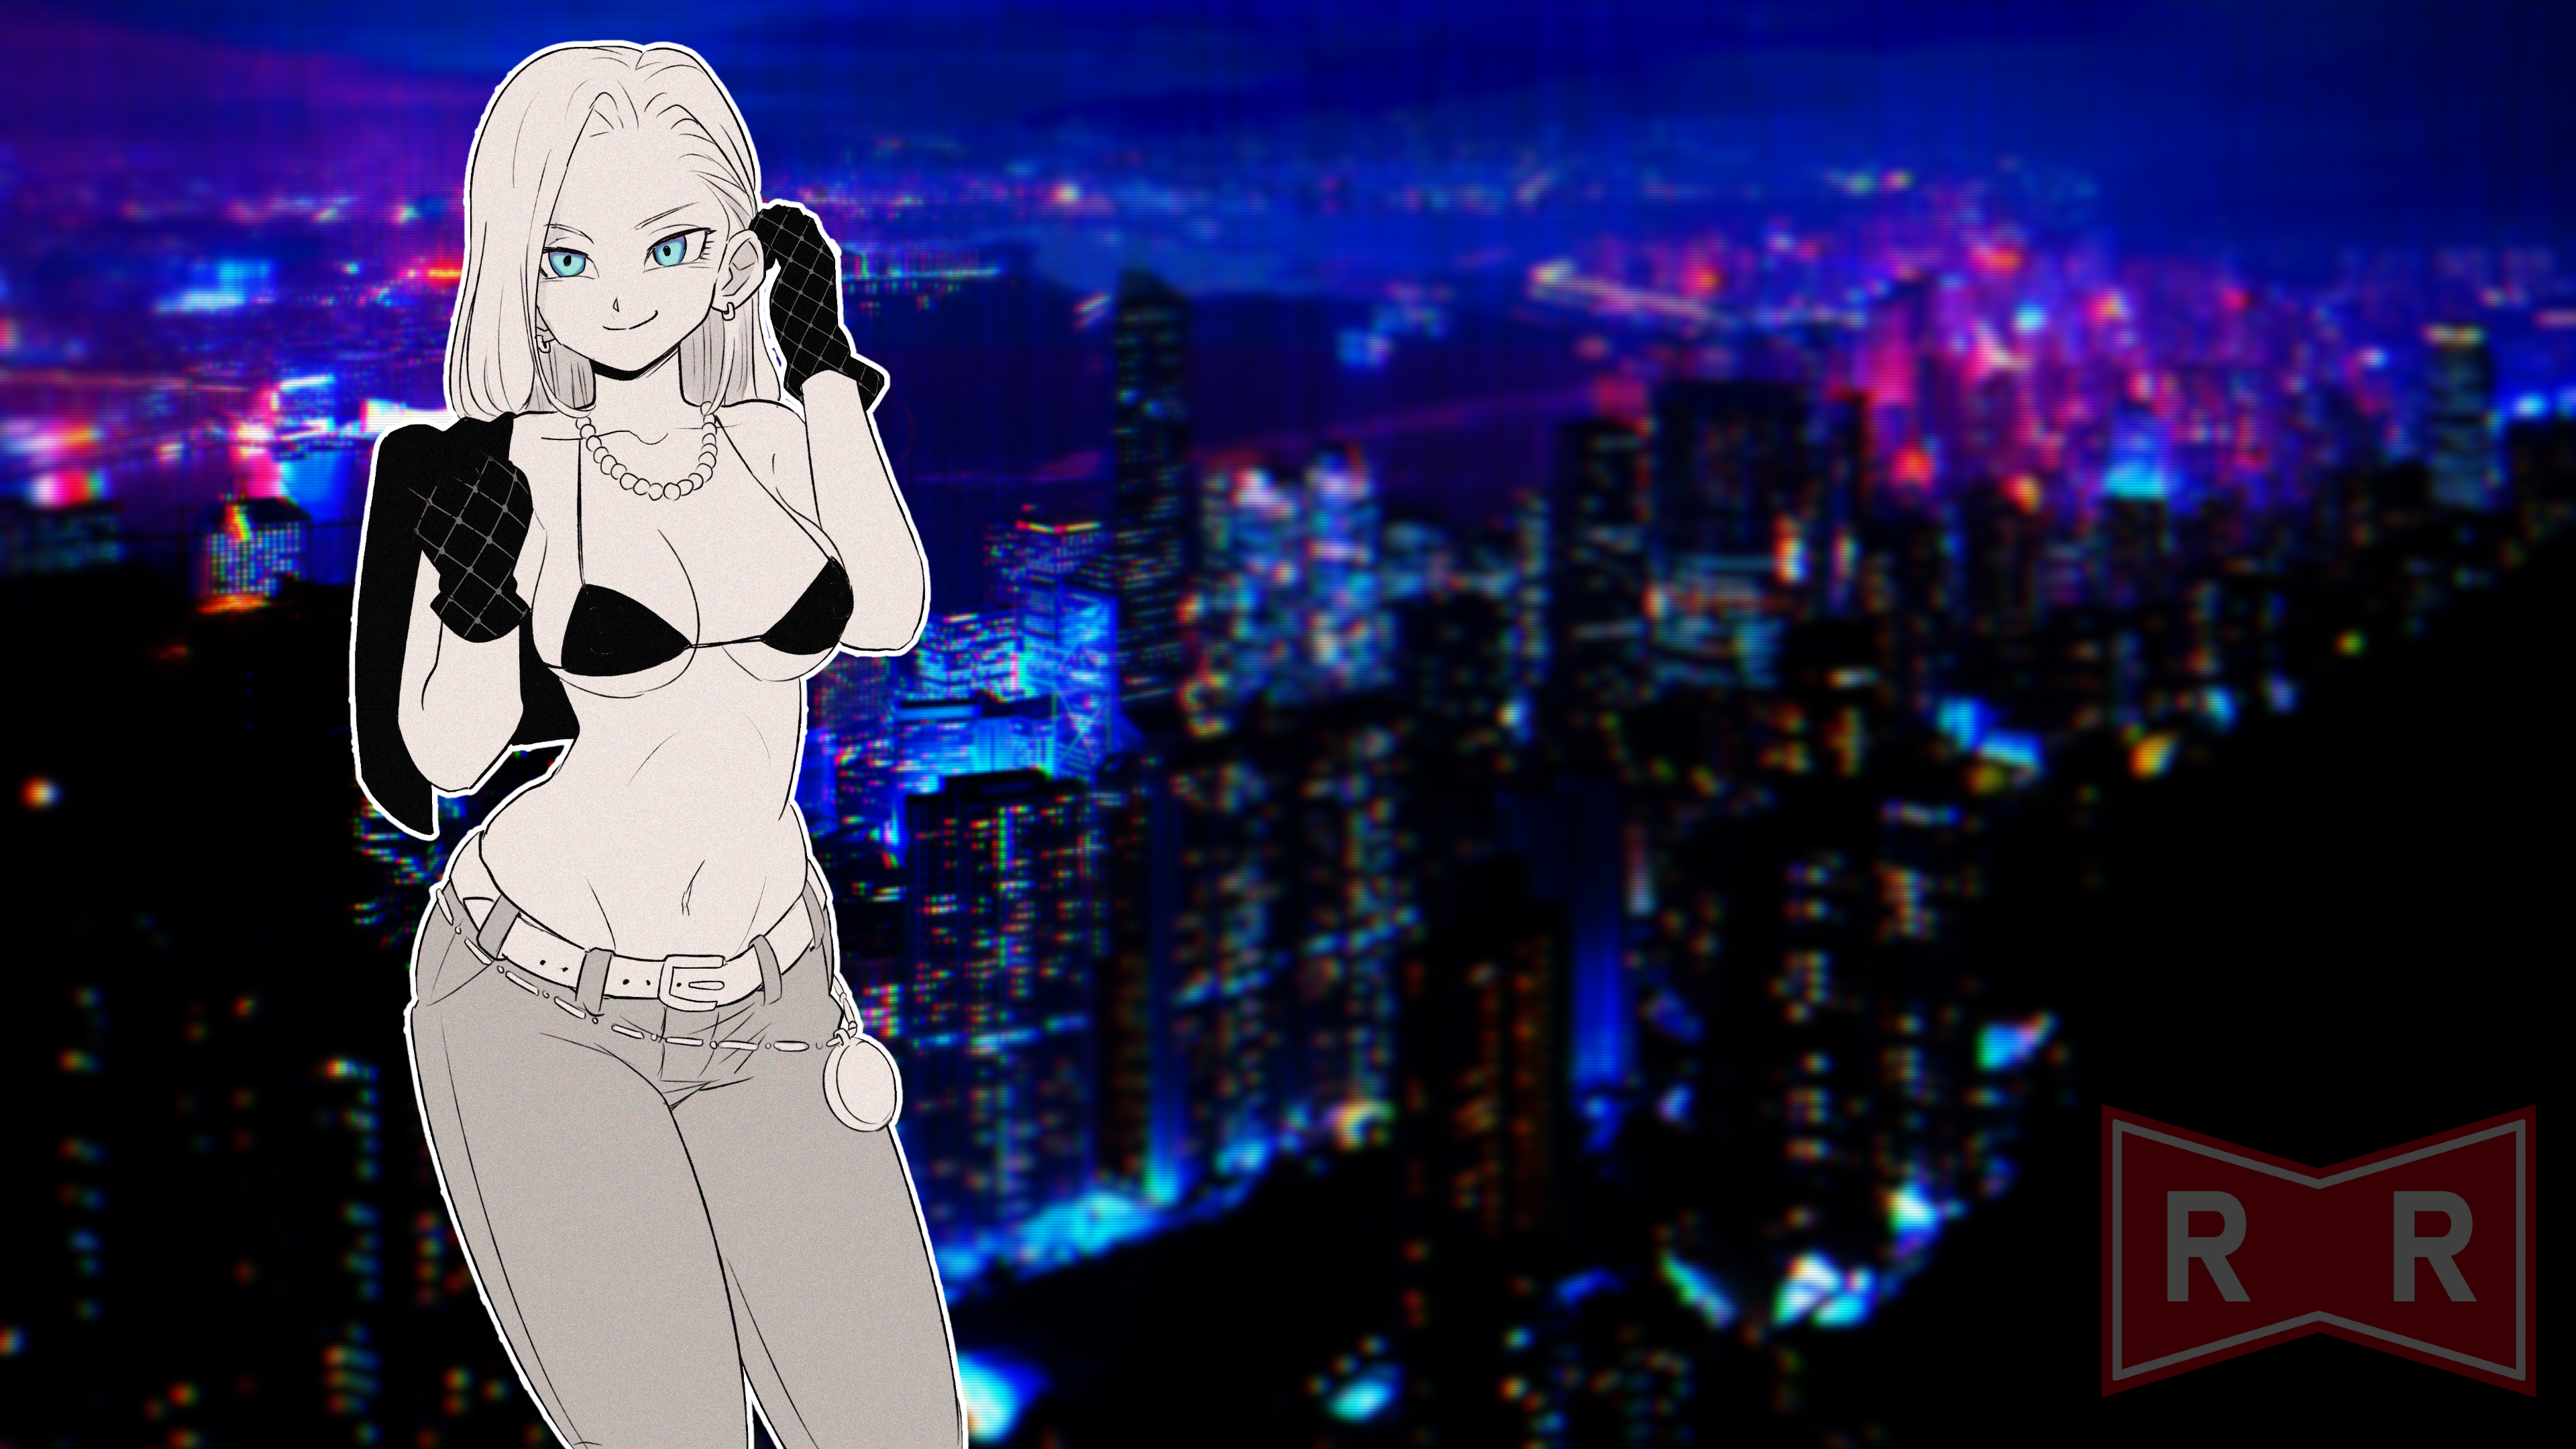 Anime 3840x2160 Dragon Ball Z Android 18 monochrome selective coloring jeans denim belt anime girls bra black bras jacket black jackets gloves black gloves blue eyes long hair necklace smiling looking at viewer bare midriff belly belly button city night sky skyline bokeh night building skyscraper bare shoulders red ribbon army earring pearl necklace city lights